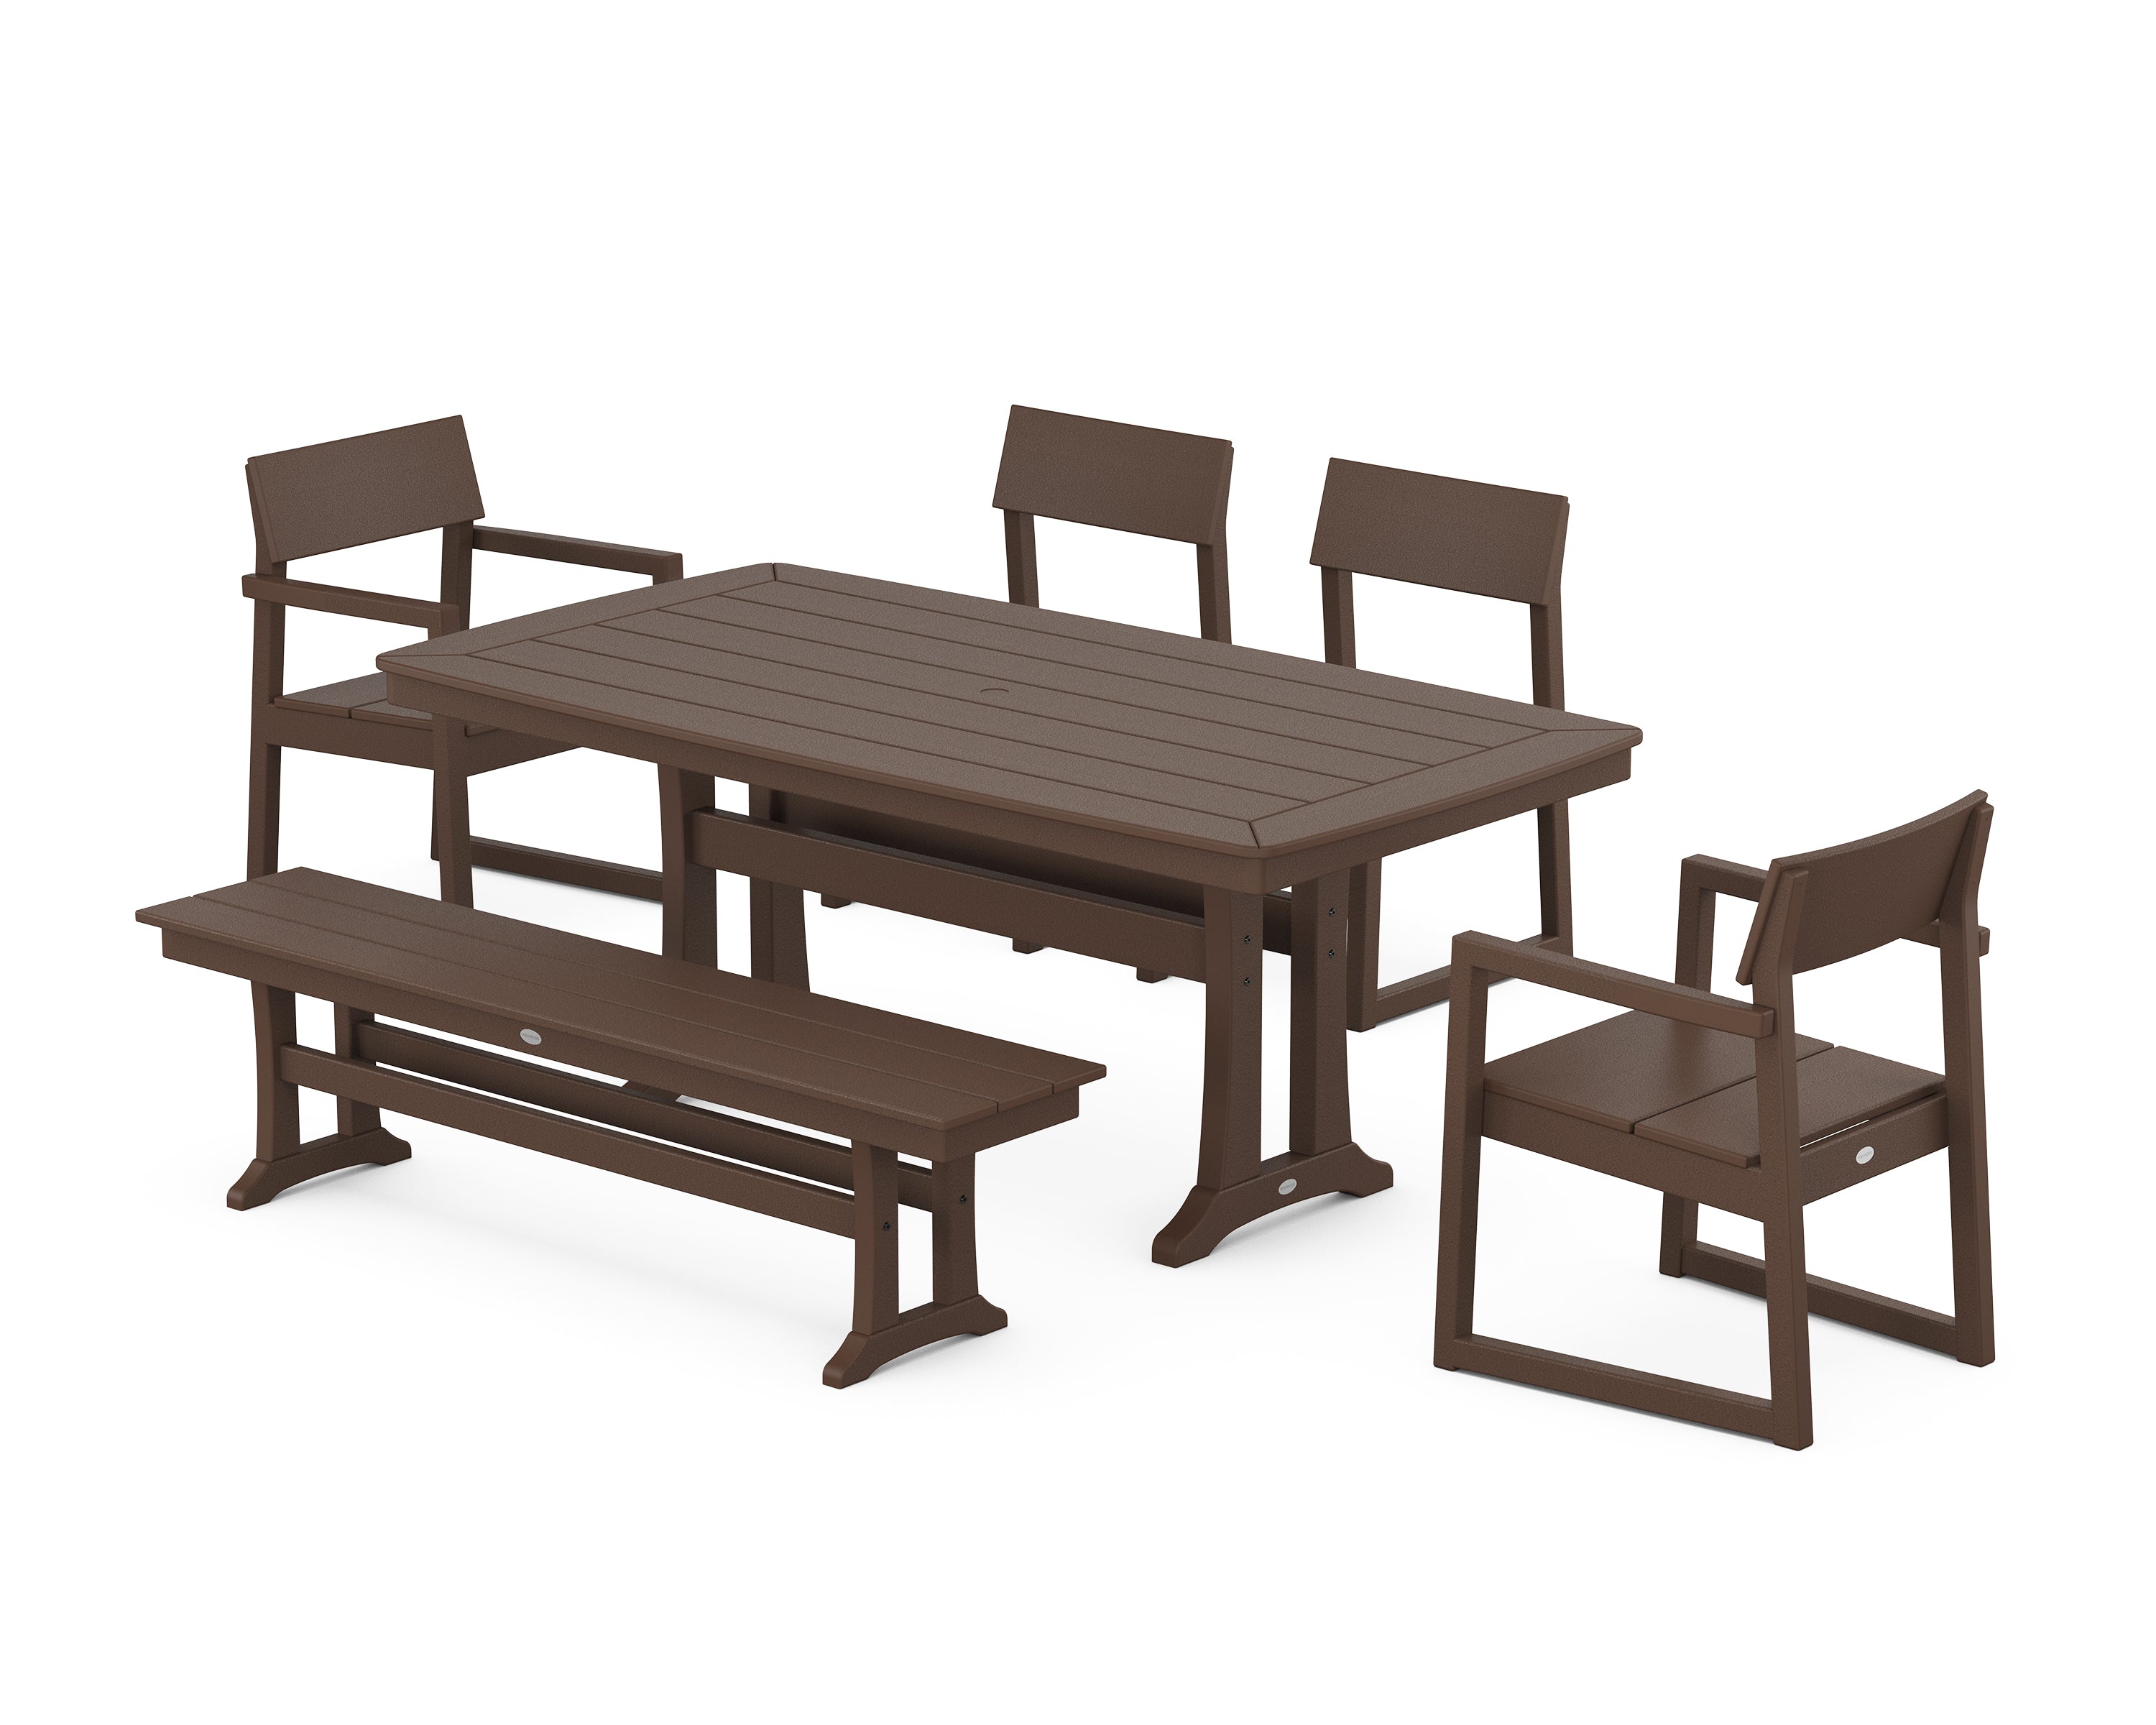 POLYWOOD® EDGE 6-Piece Dining Set with Trestle Legs in Mahogany